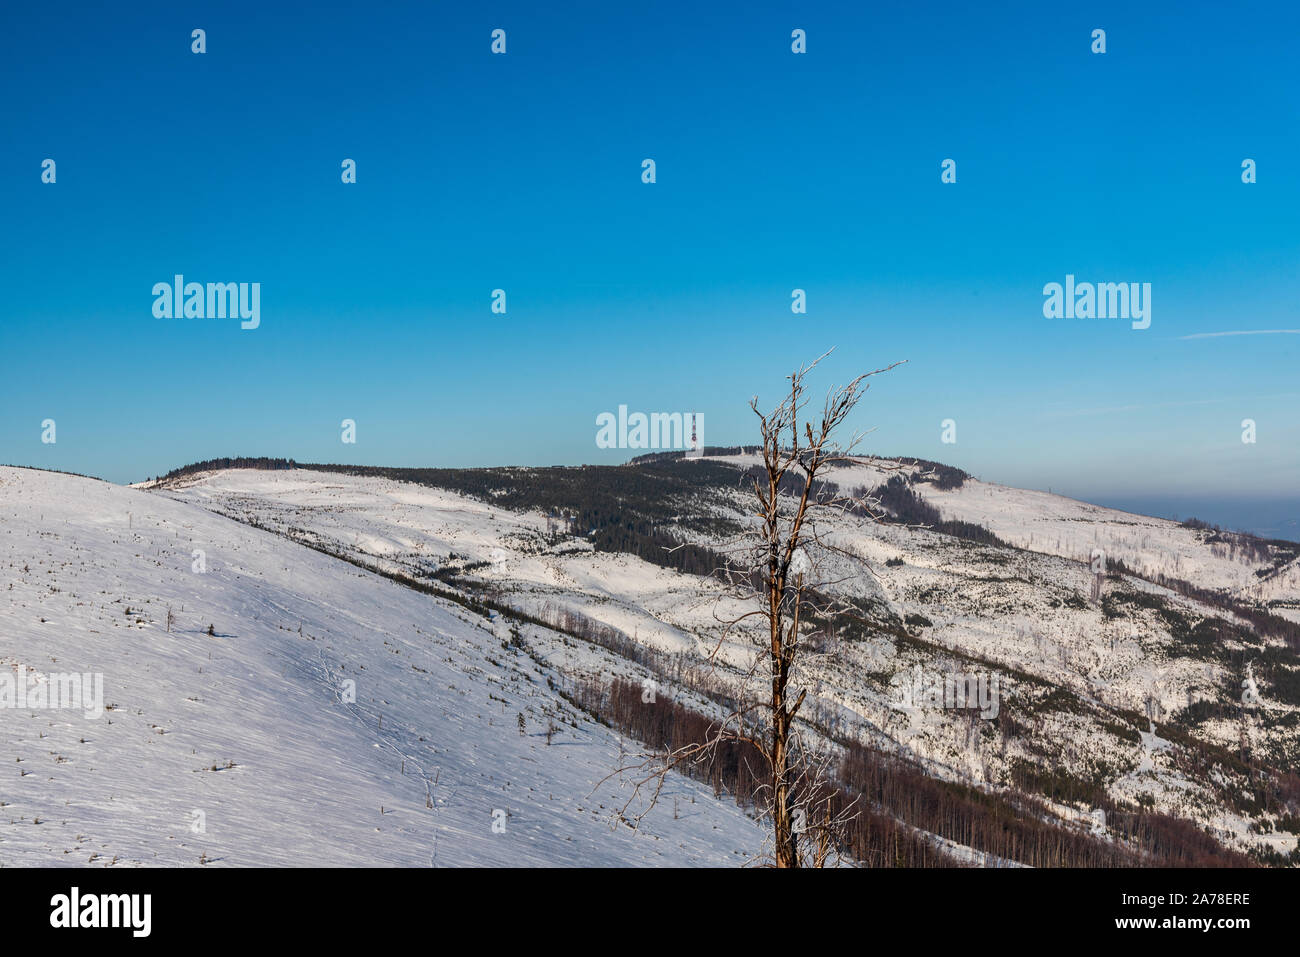 Skrzyczne hill with communication tower from rock formation on Malinowska Skala hill in Beskid Slaski mountains in Poland during beautiful winter day Stock Photo